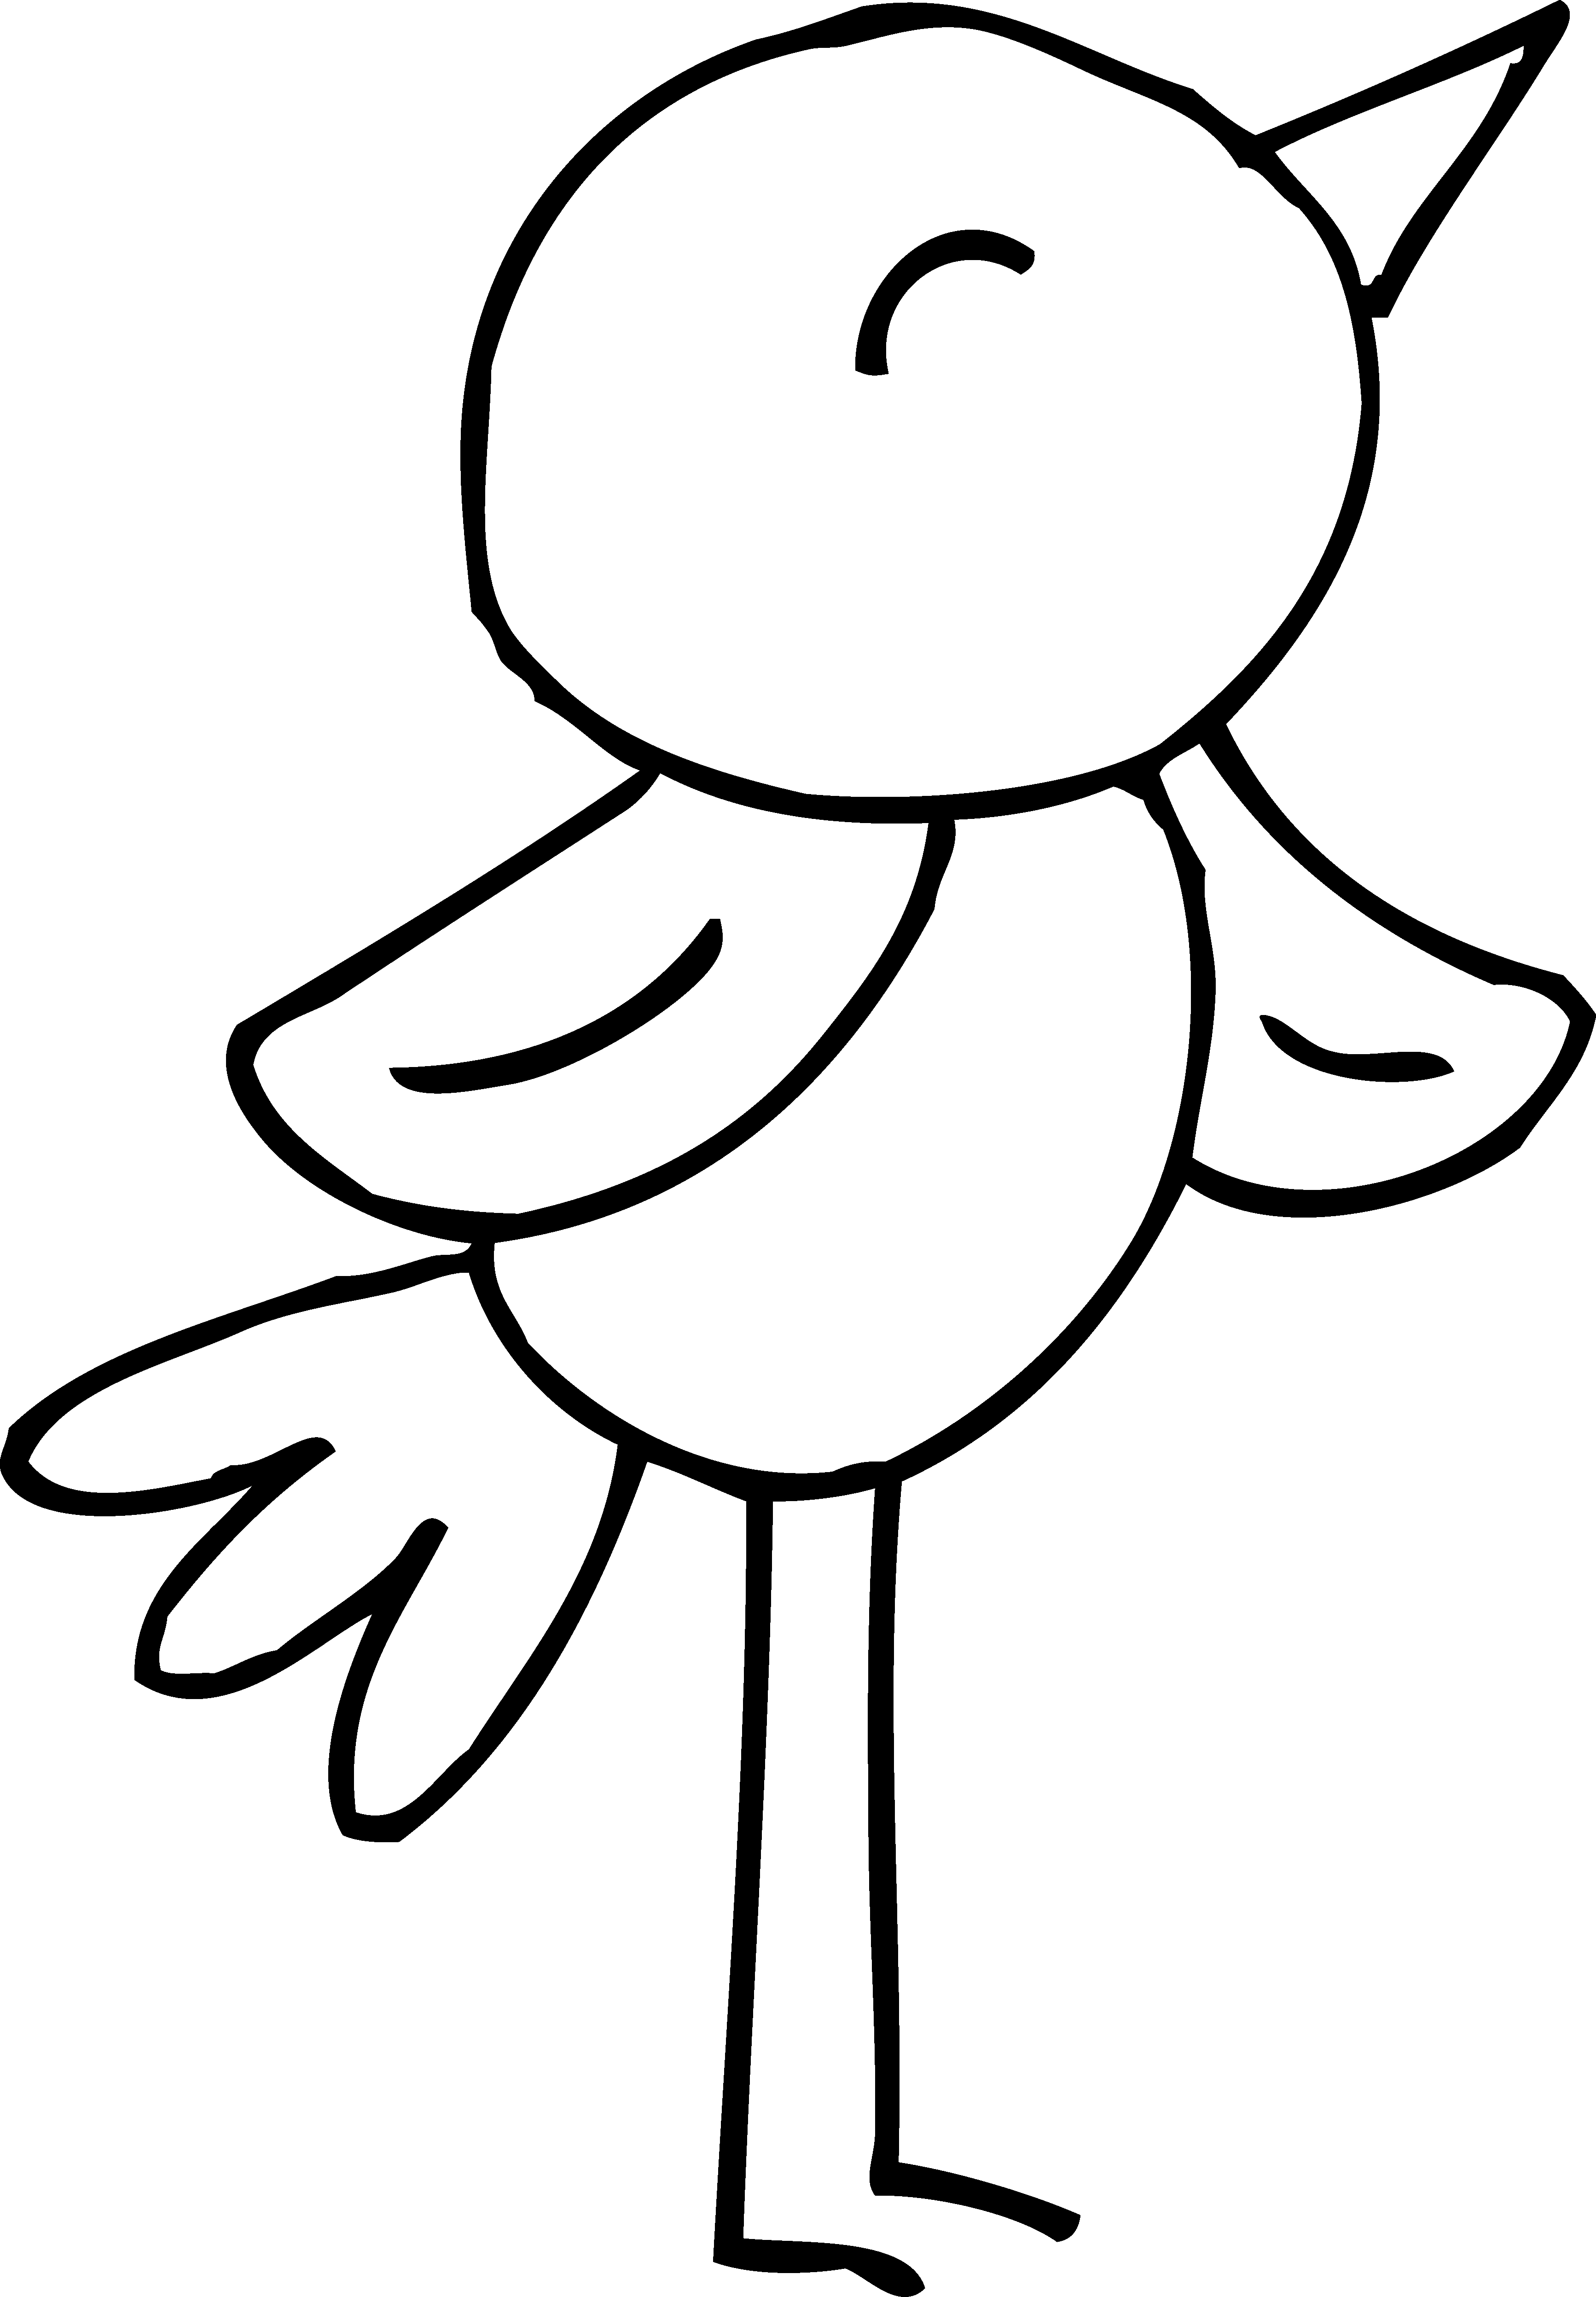 Bird Clipart Black And White   Clipart Panda   Free Clipart Images